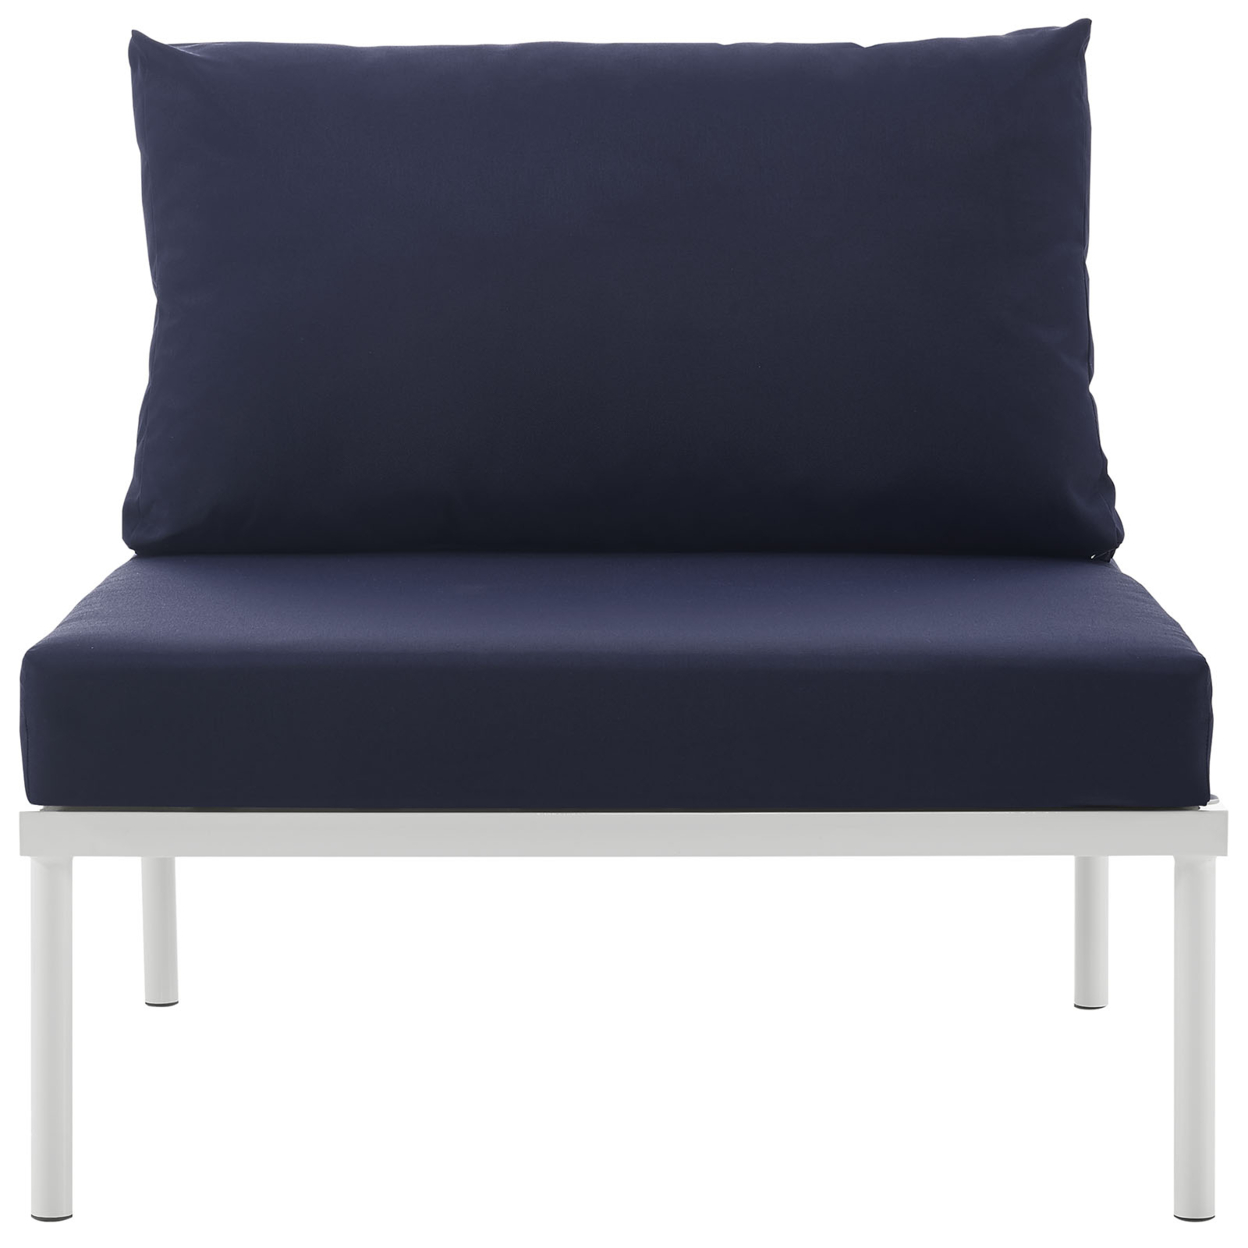 Modway Harmony Outdoor Patio Aluminum Fabric Armless Chair in White/Navy - image 3 of 4